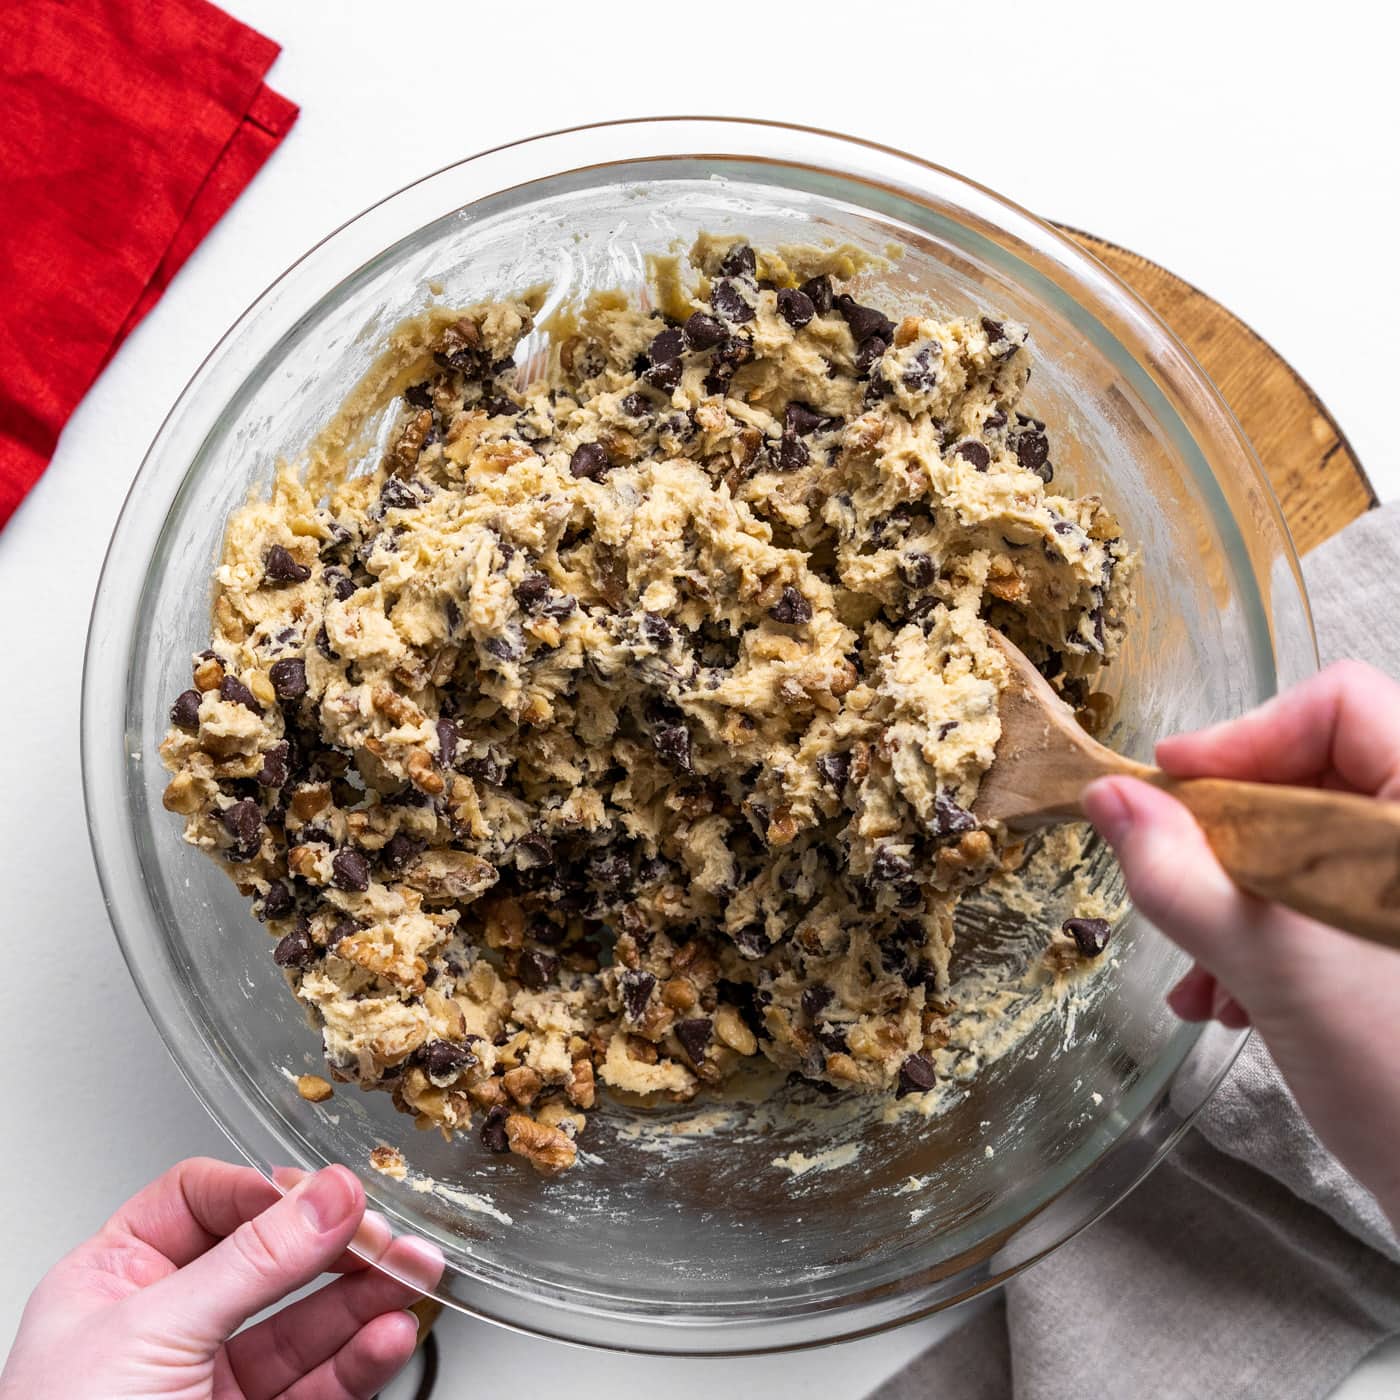 walnuts and chocolate chips in cookie dough